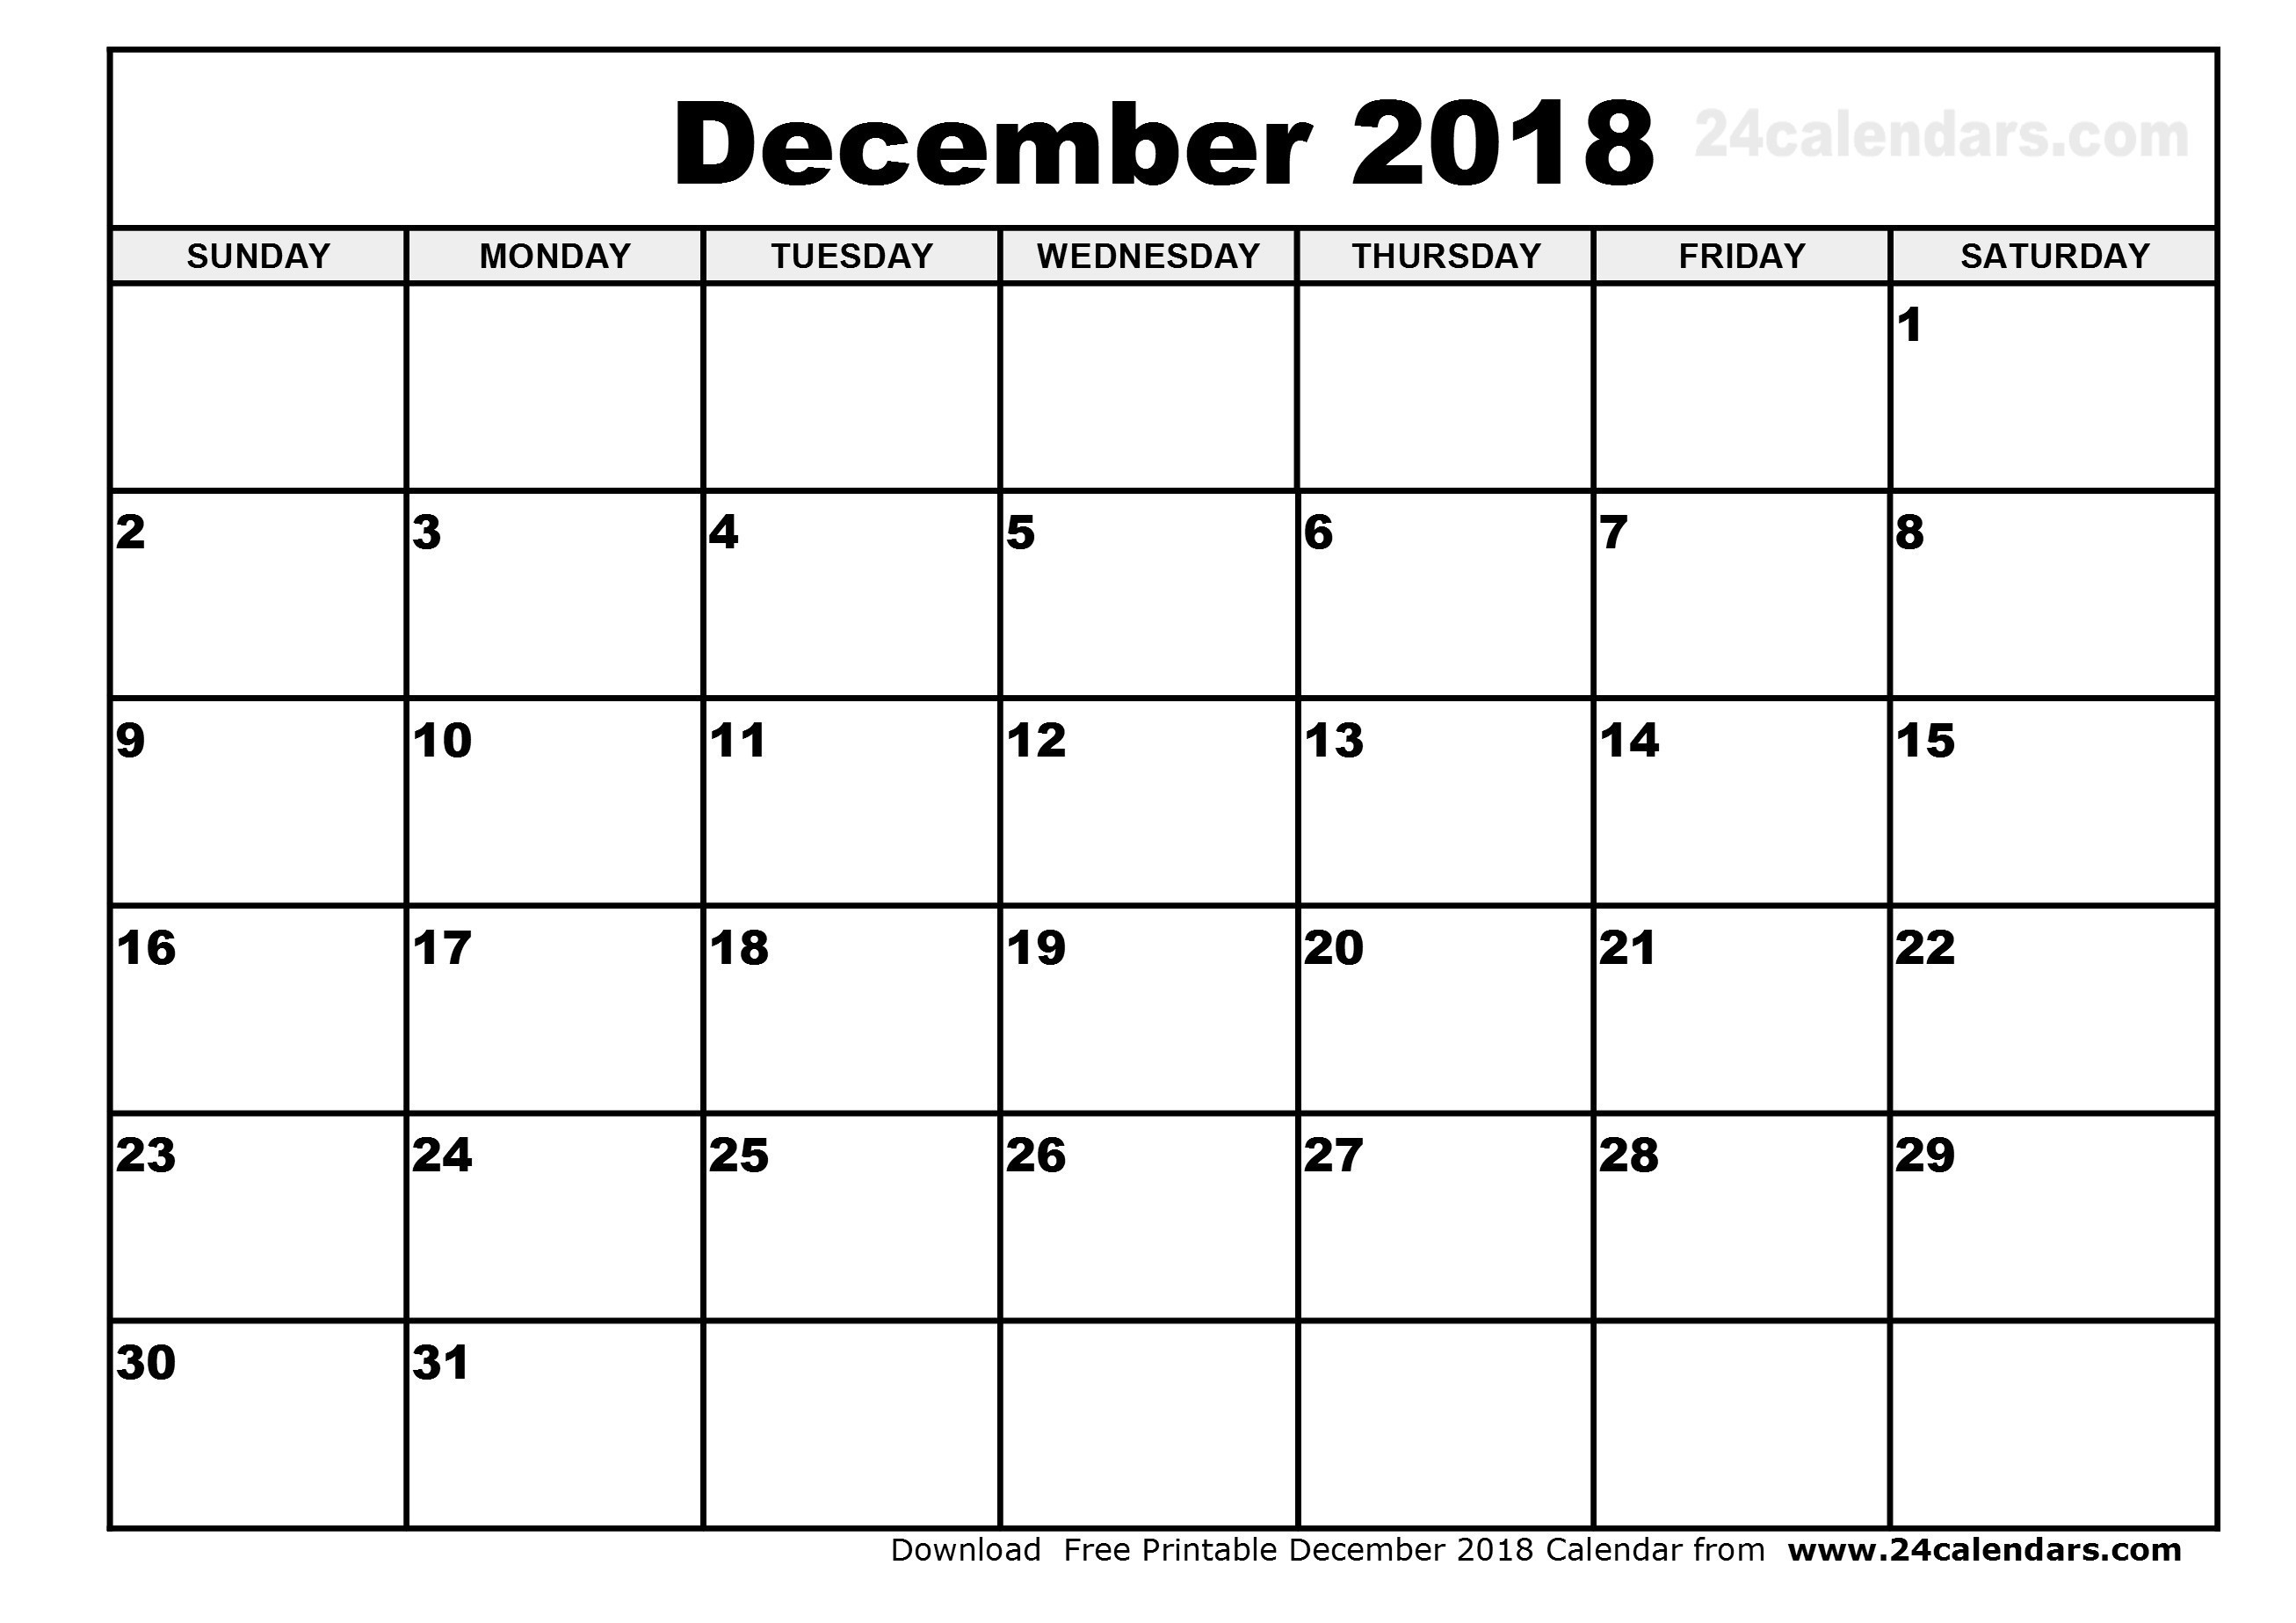 Calendar Template 3 Months Per Page Time And Date | Calendar-Calendar Template 3 Months Per Page Time And Date